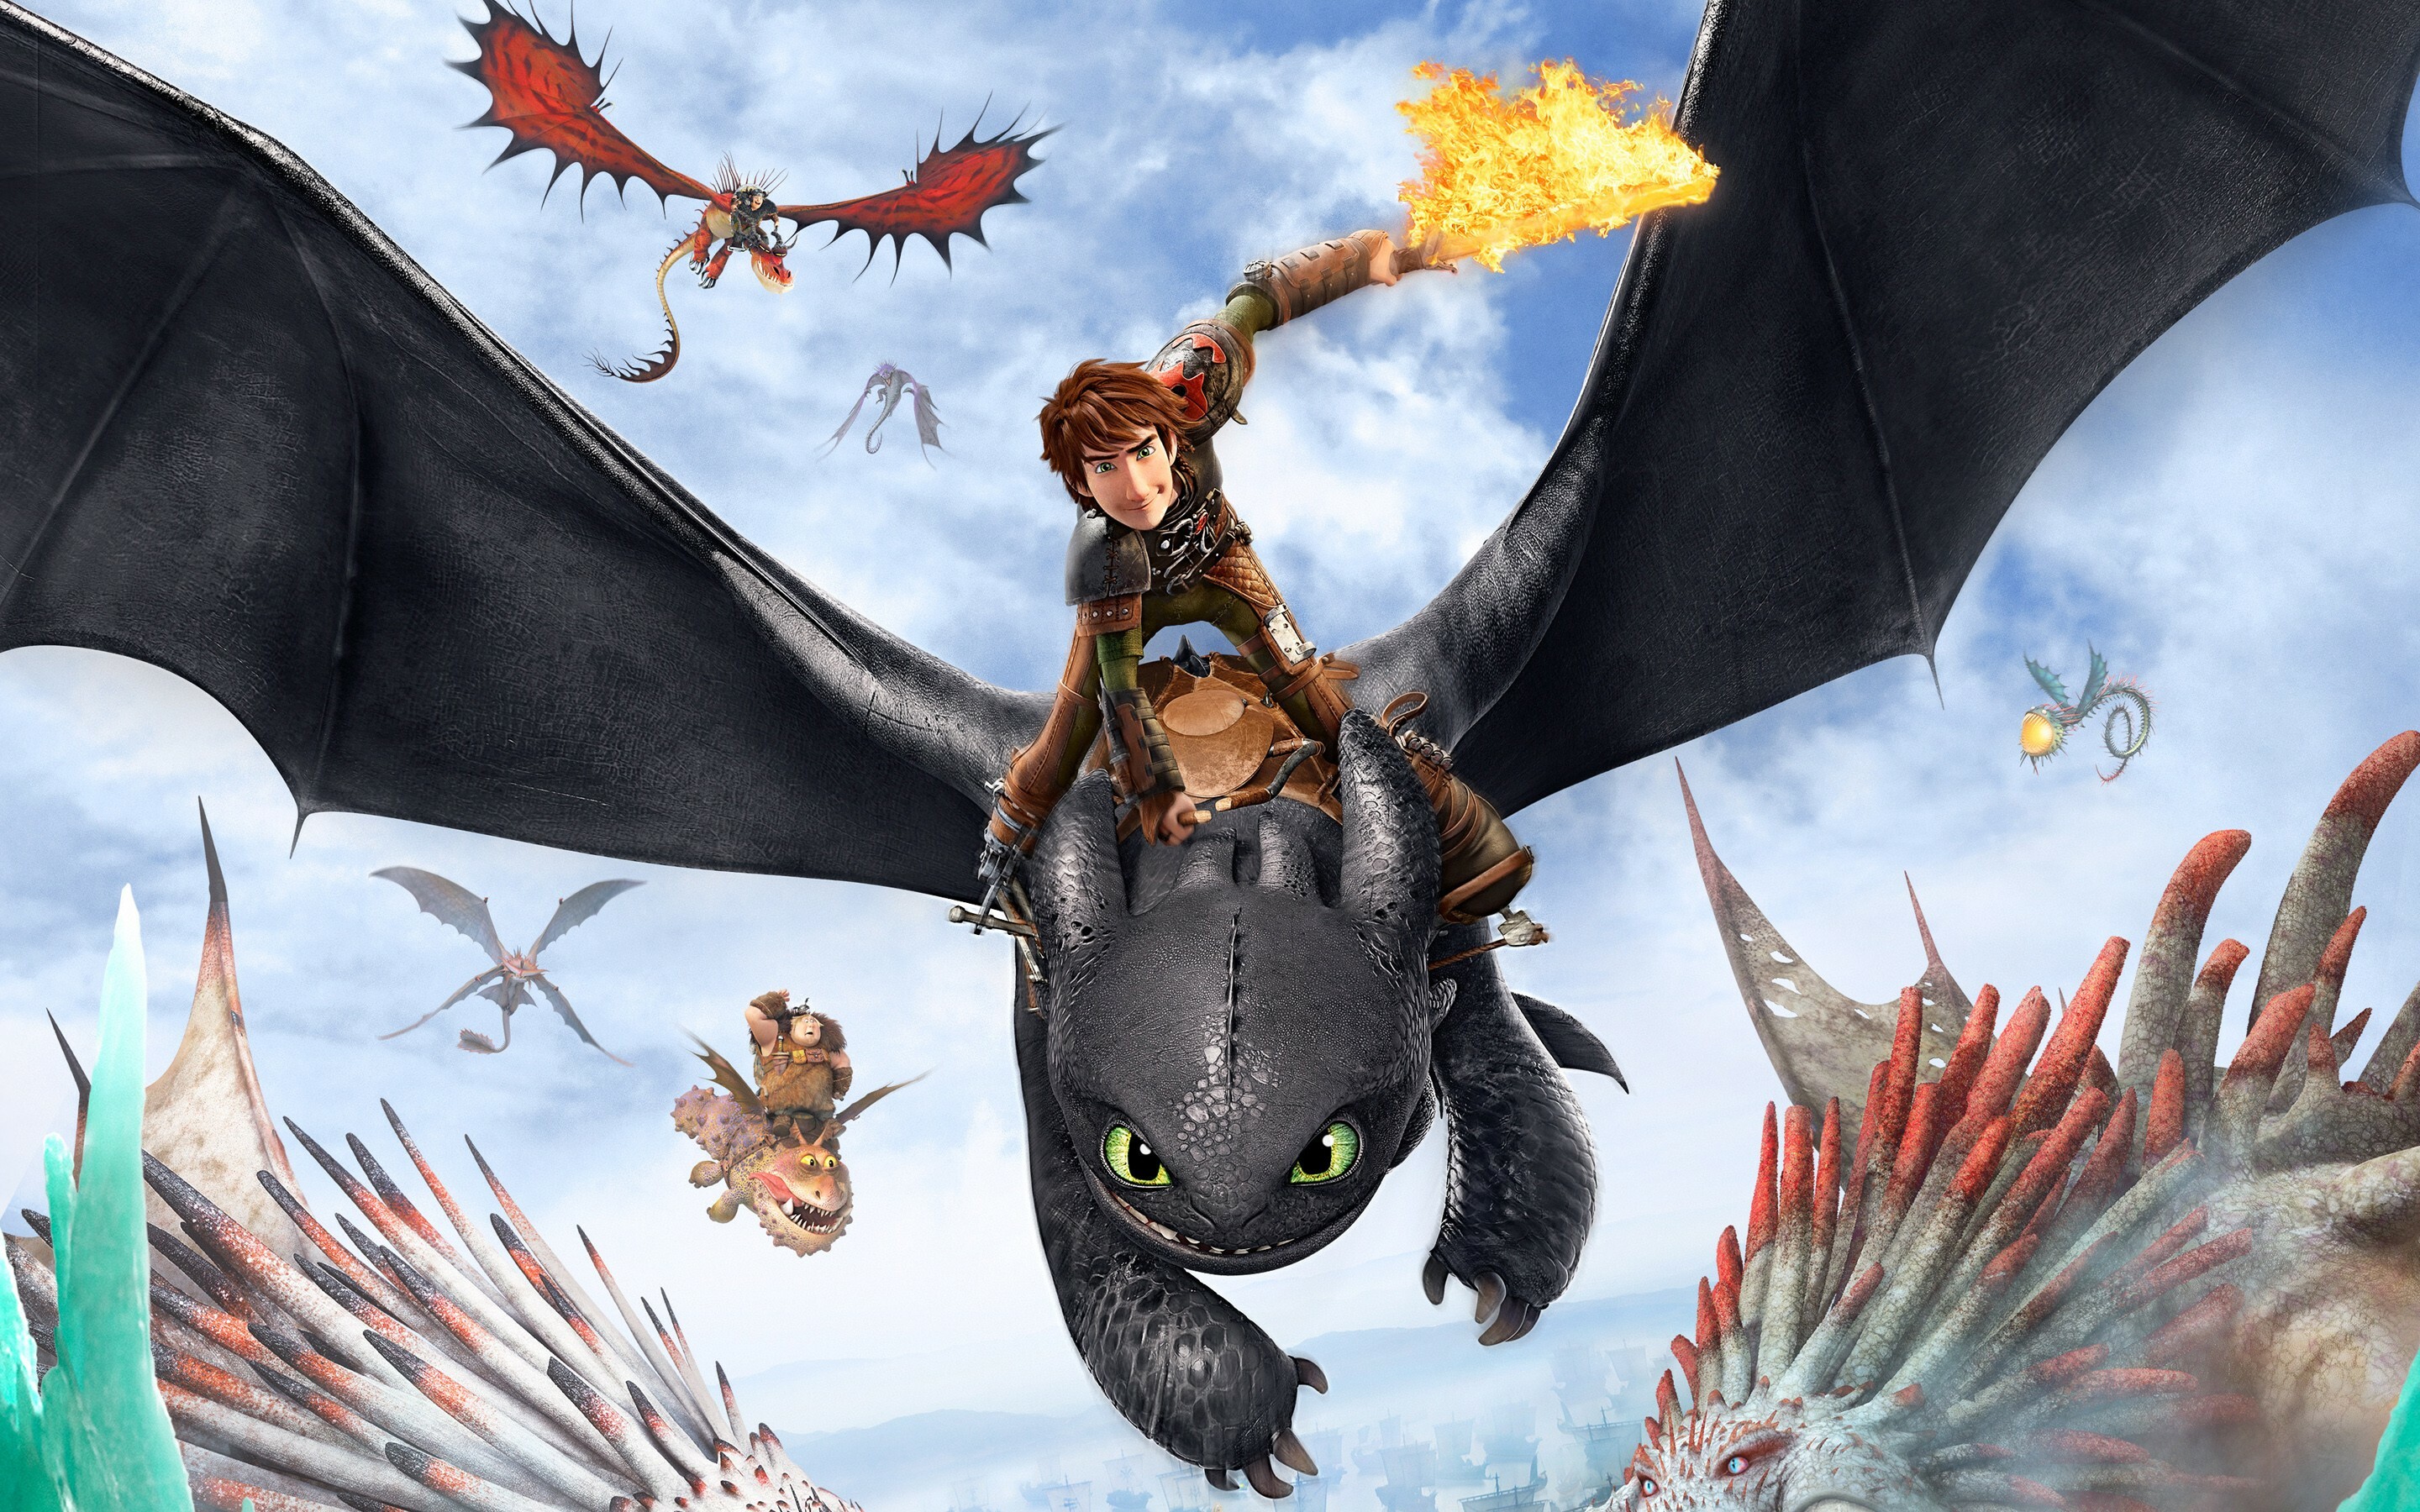 How to Train Your Dragon: Cressida Cowell, The author and the illustrator of the bestselling HTTYD book series. 2880x1800 HD Wallpaper.